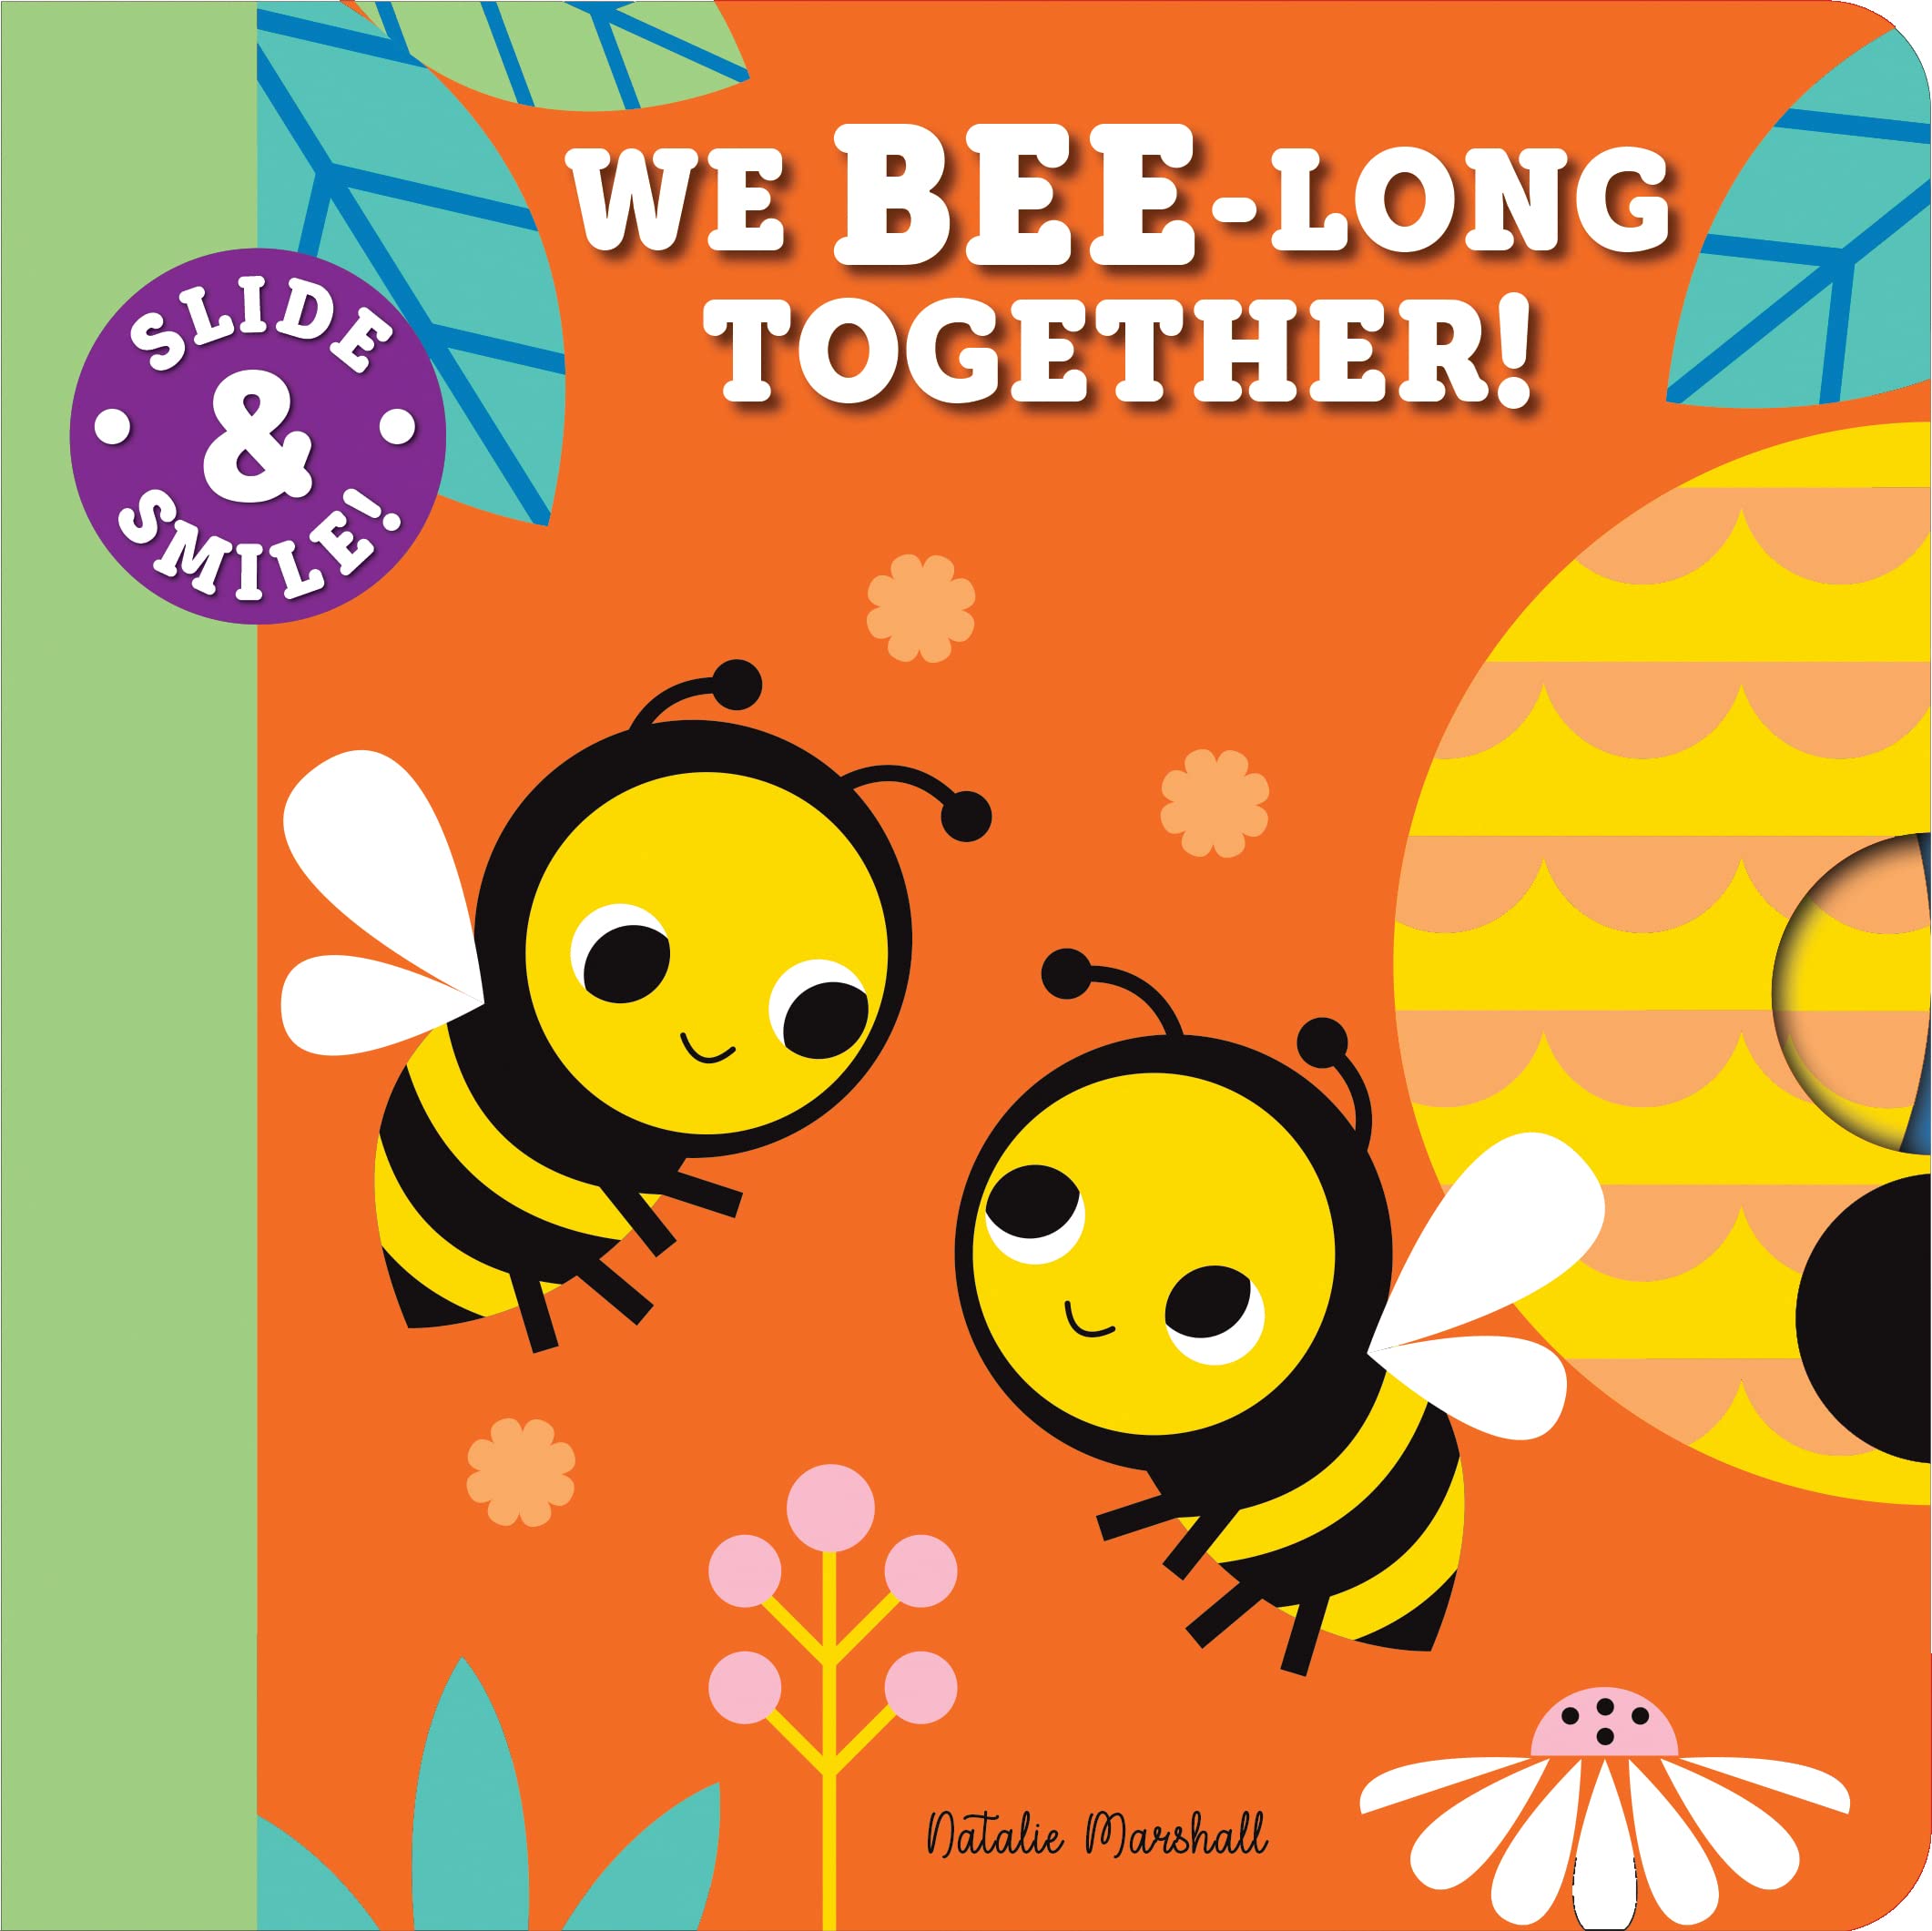 Sourcebooks Slide and Smile: We Bee-long Together! Board Book